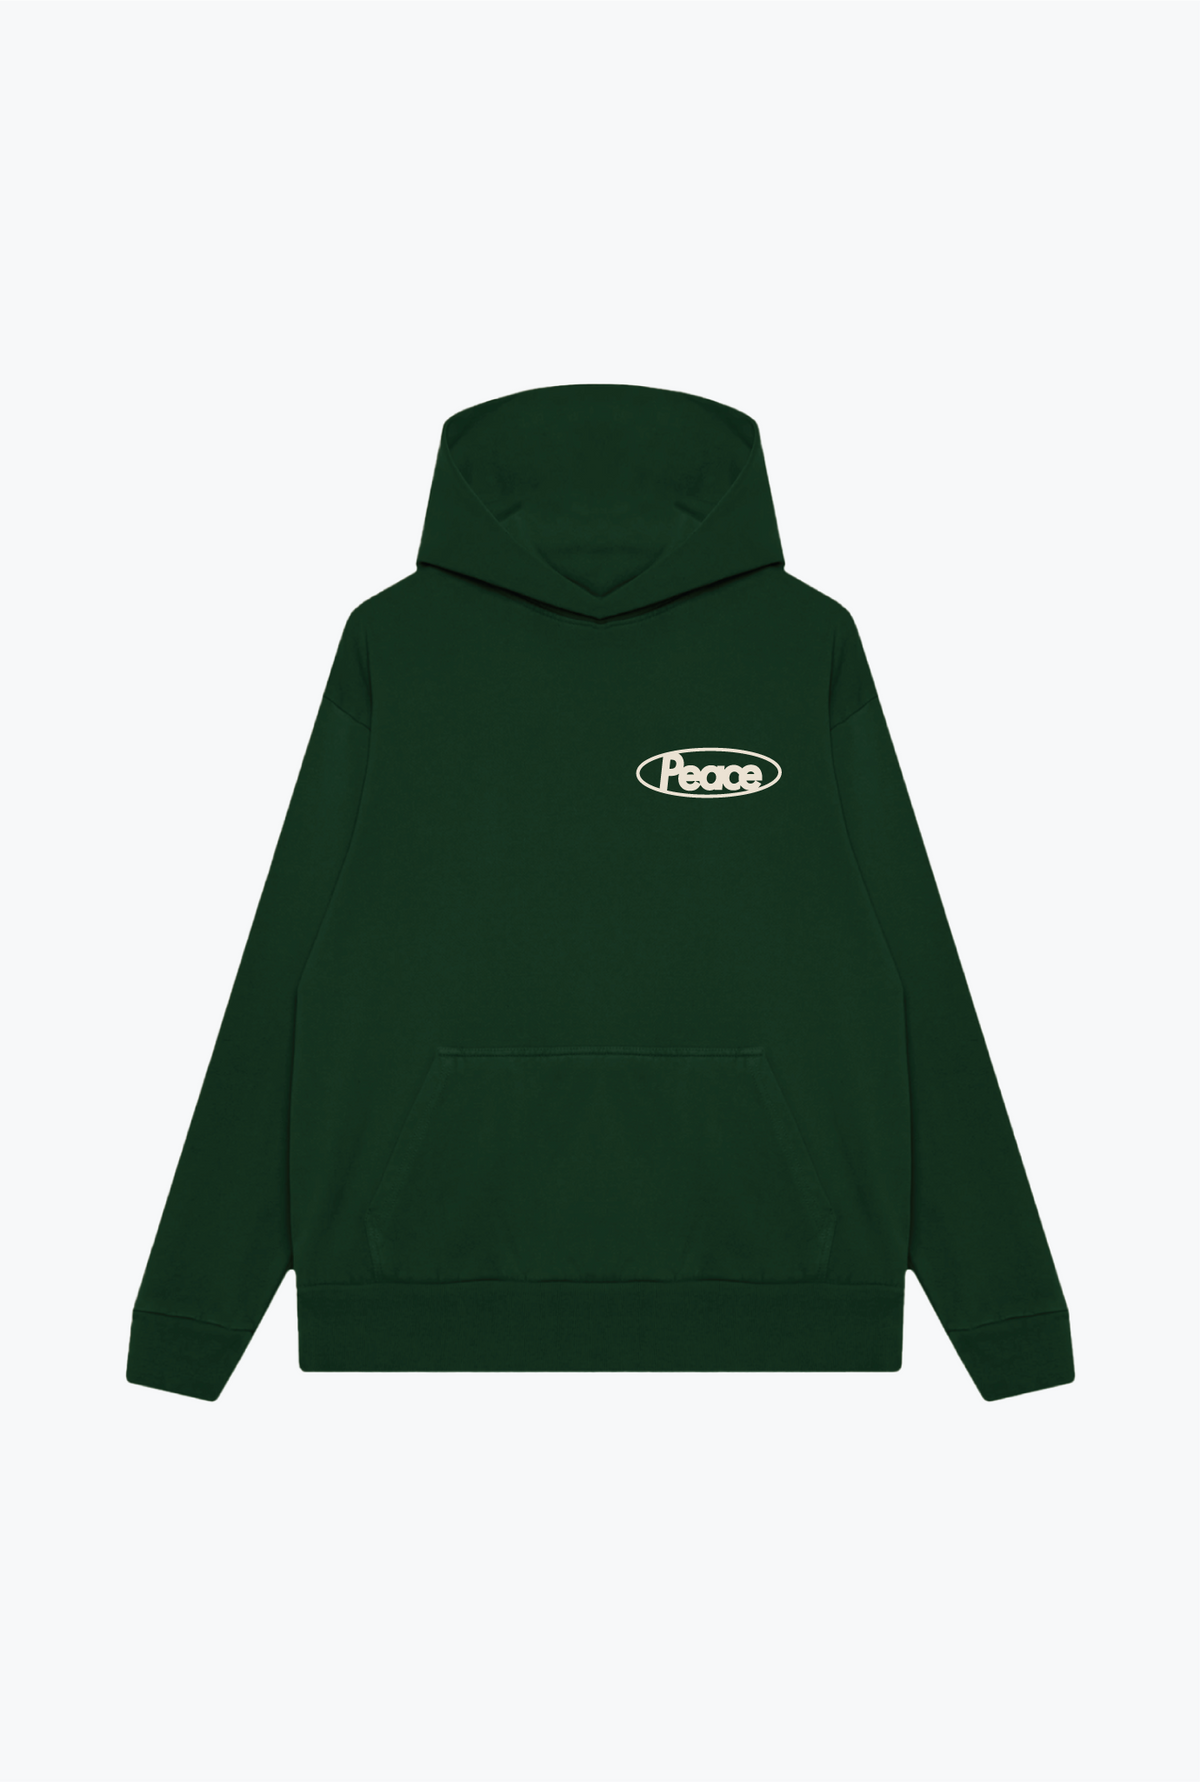 Stay Close to People Who Feel Like Home Heavyweight Hoodie - Forest Green